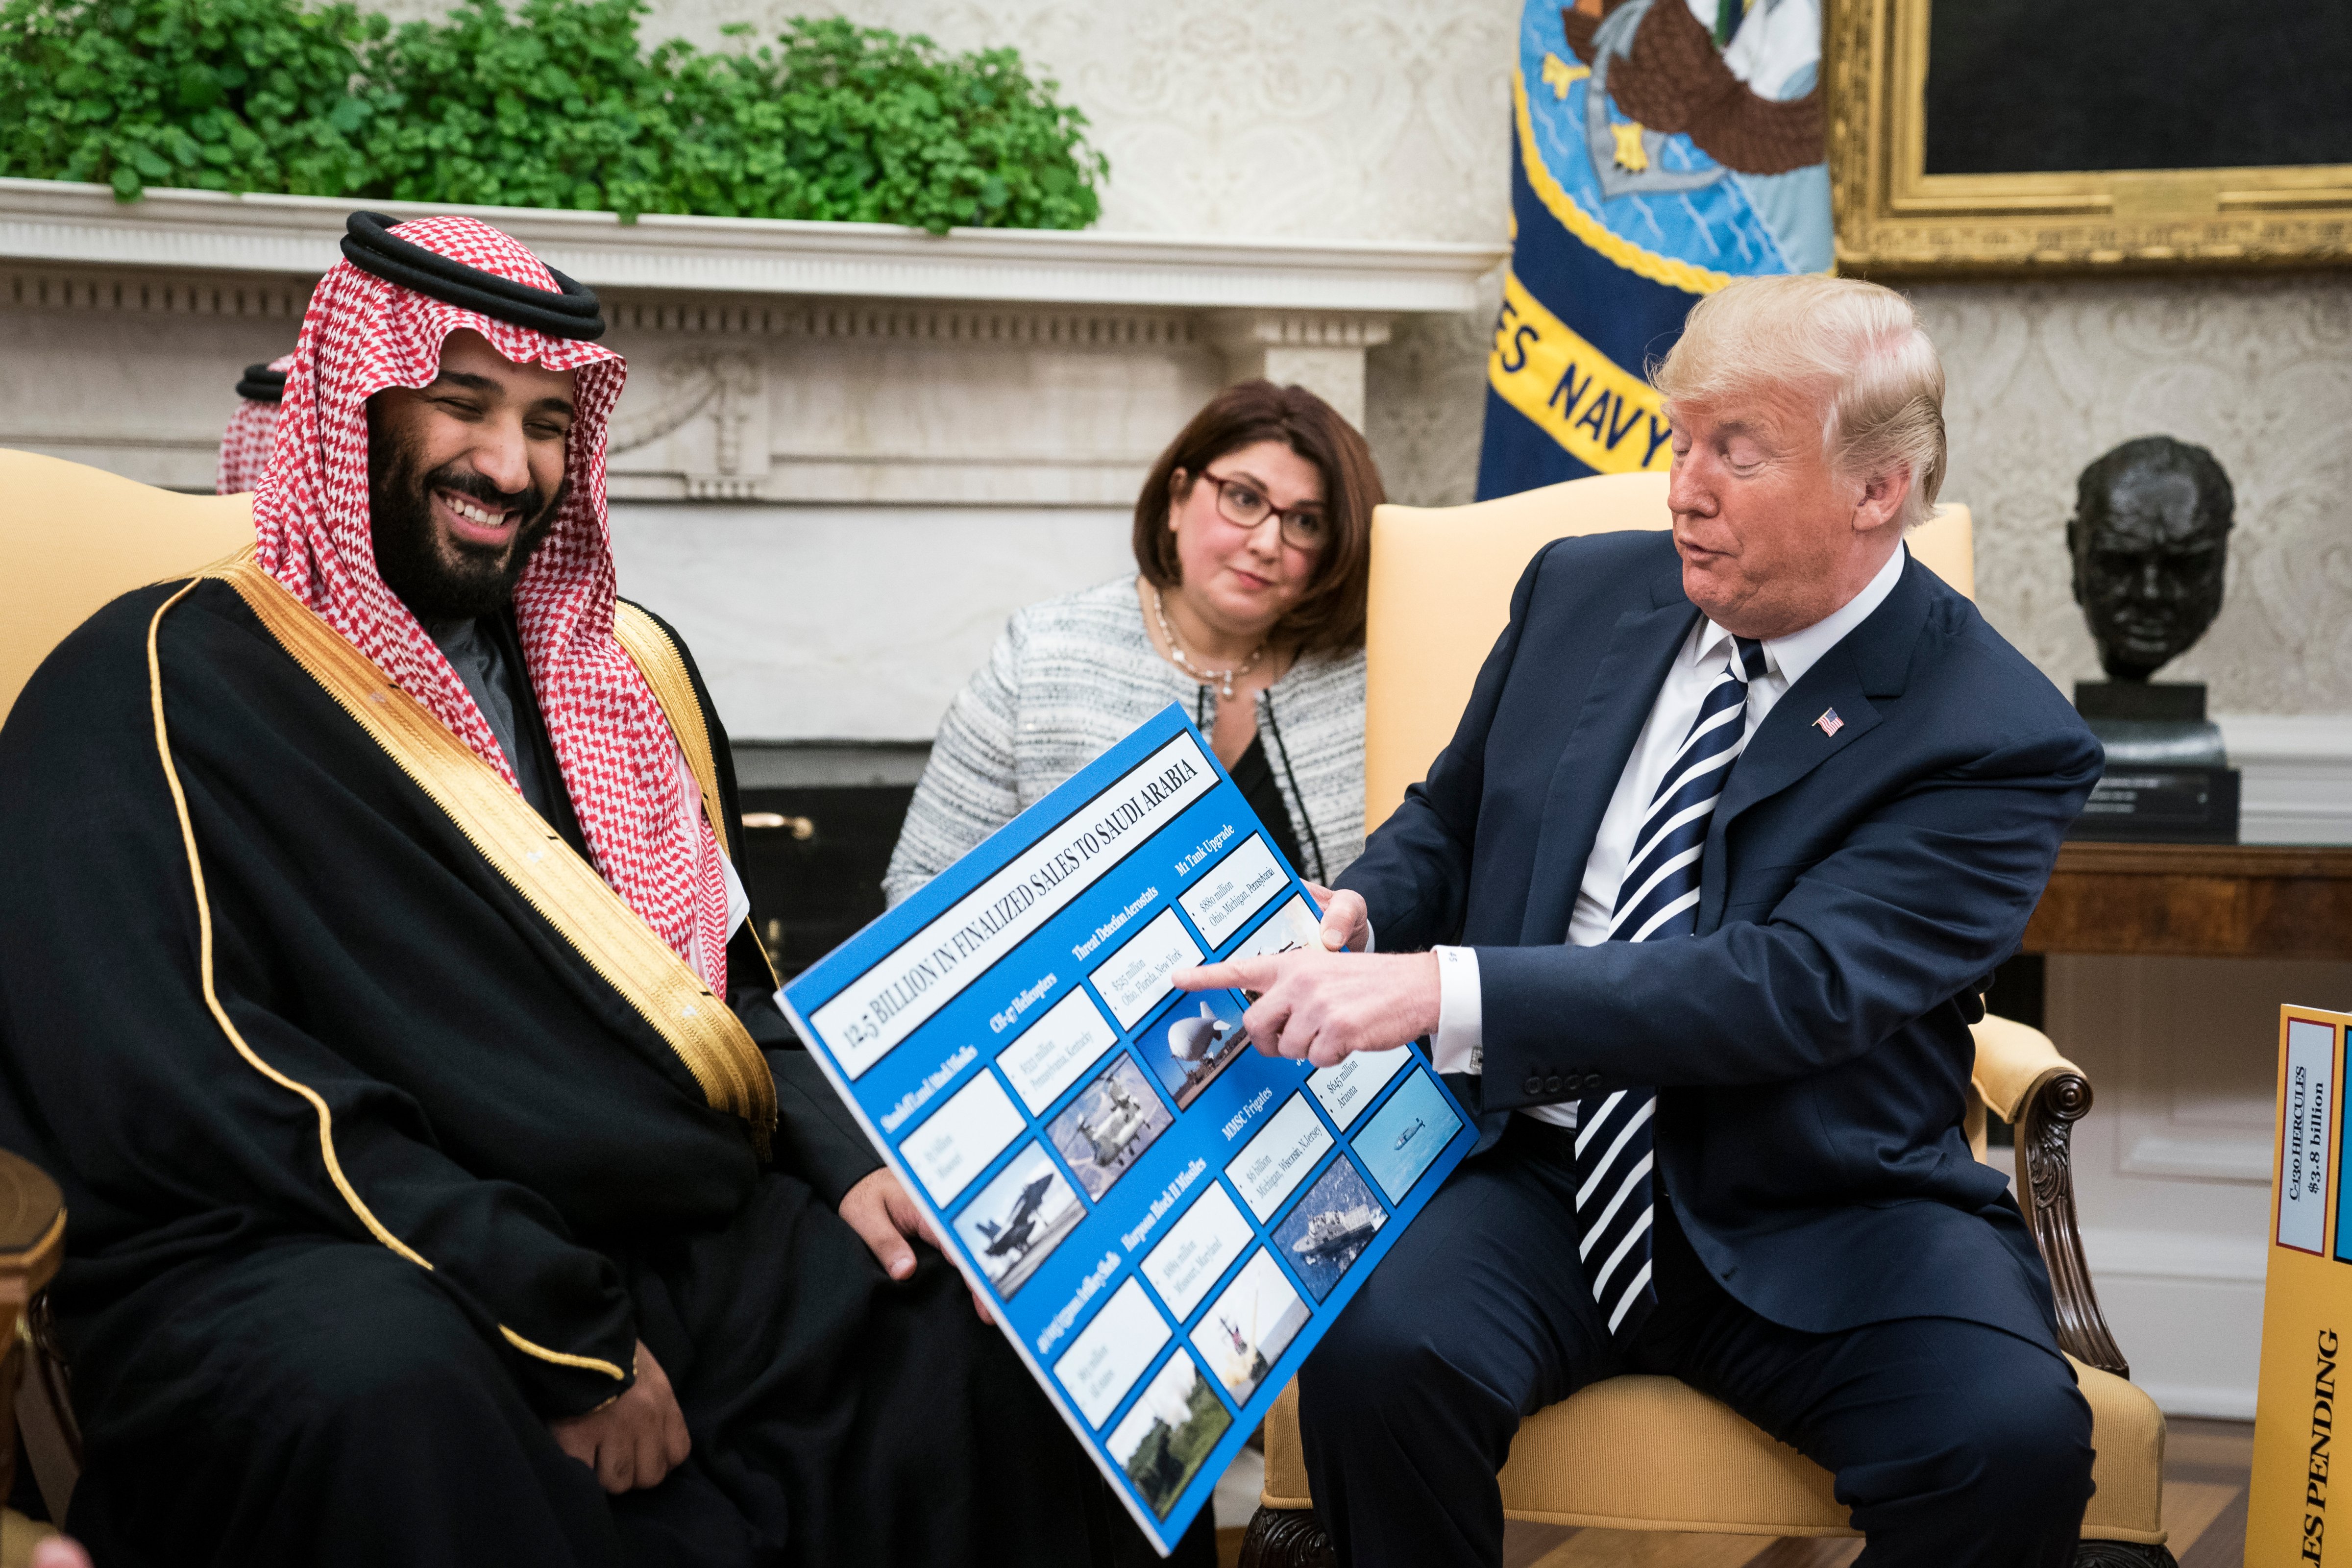 President Donald Trump shows off posters as he talks with Saudi Crown Prince Mohammad bin Salman in the Oval Office of the White House on March 20, 2018 in Washington, DC. (Jabin Botsford&mdash;The Washington Post/Getty Images)